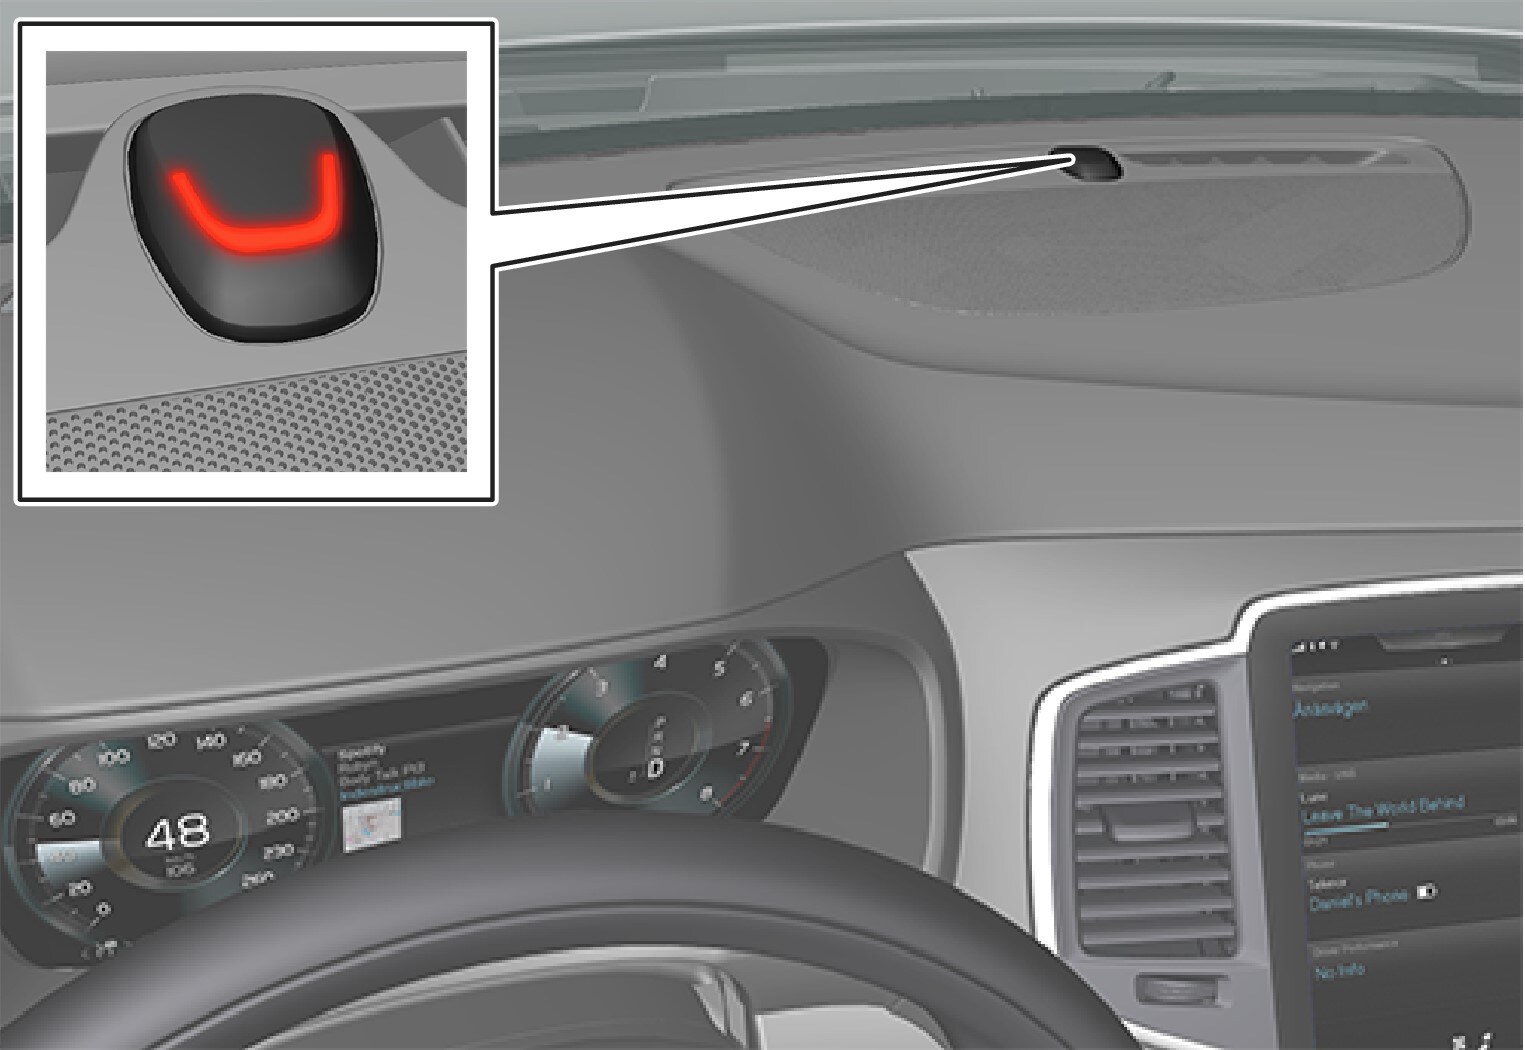 The lock and alarm indicator on the instrument panel show the status of the alarm system.